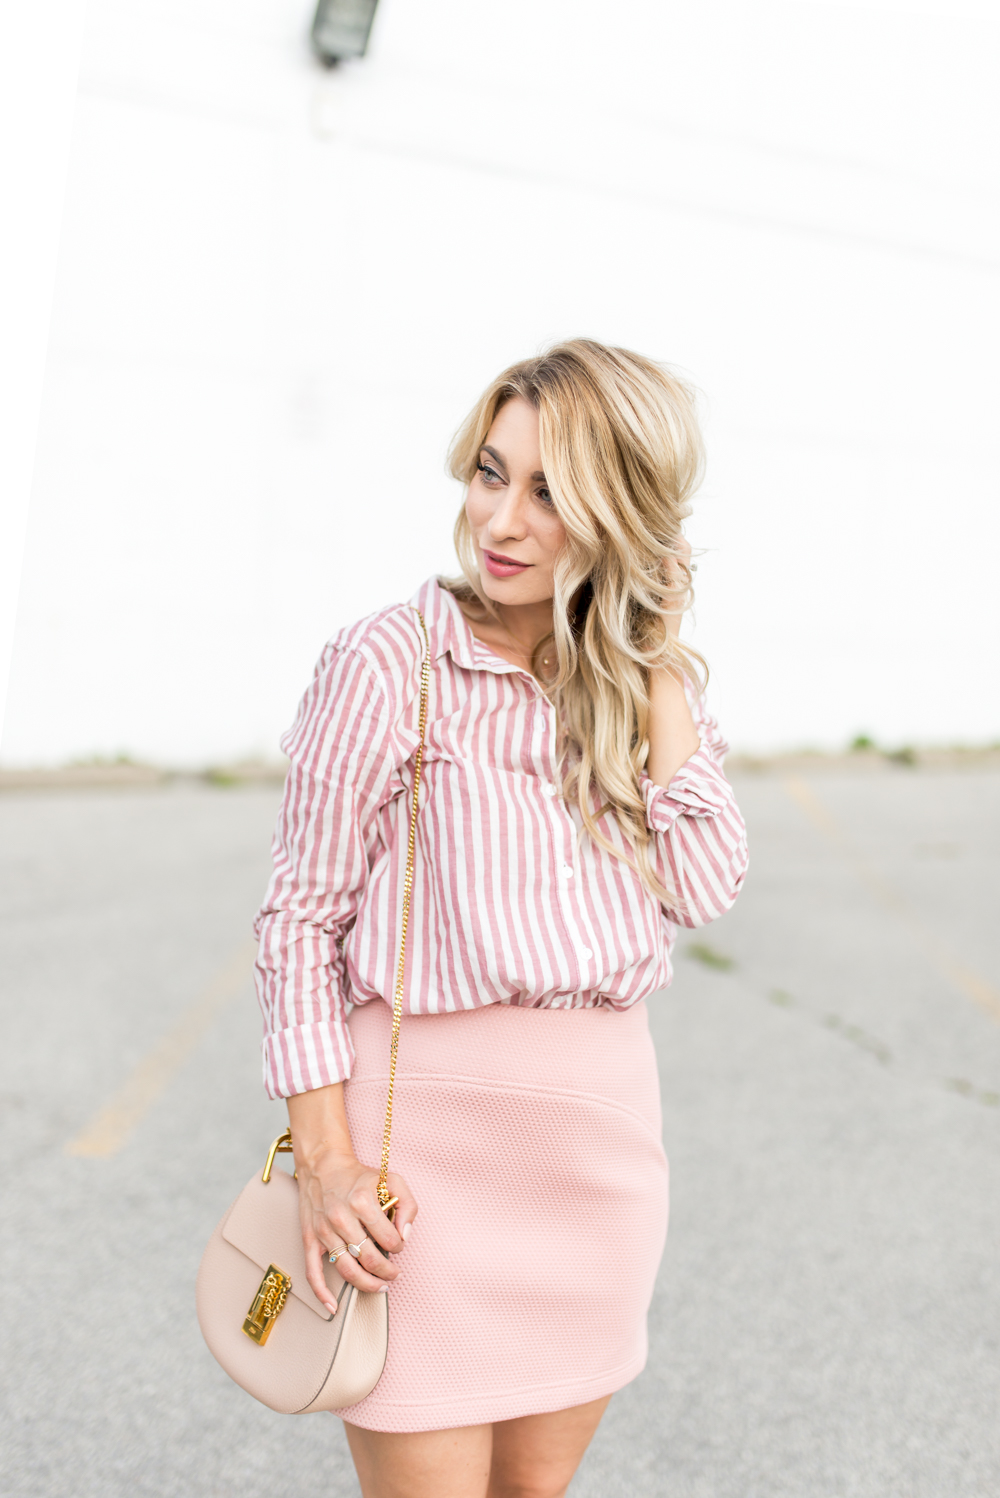 OOTD - What I've Been Wearing Lately | La Petite Noob | A Toronto-Based ...